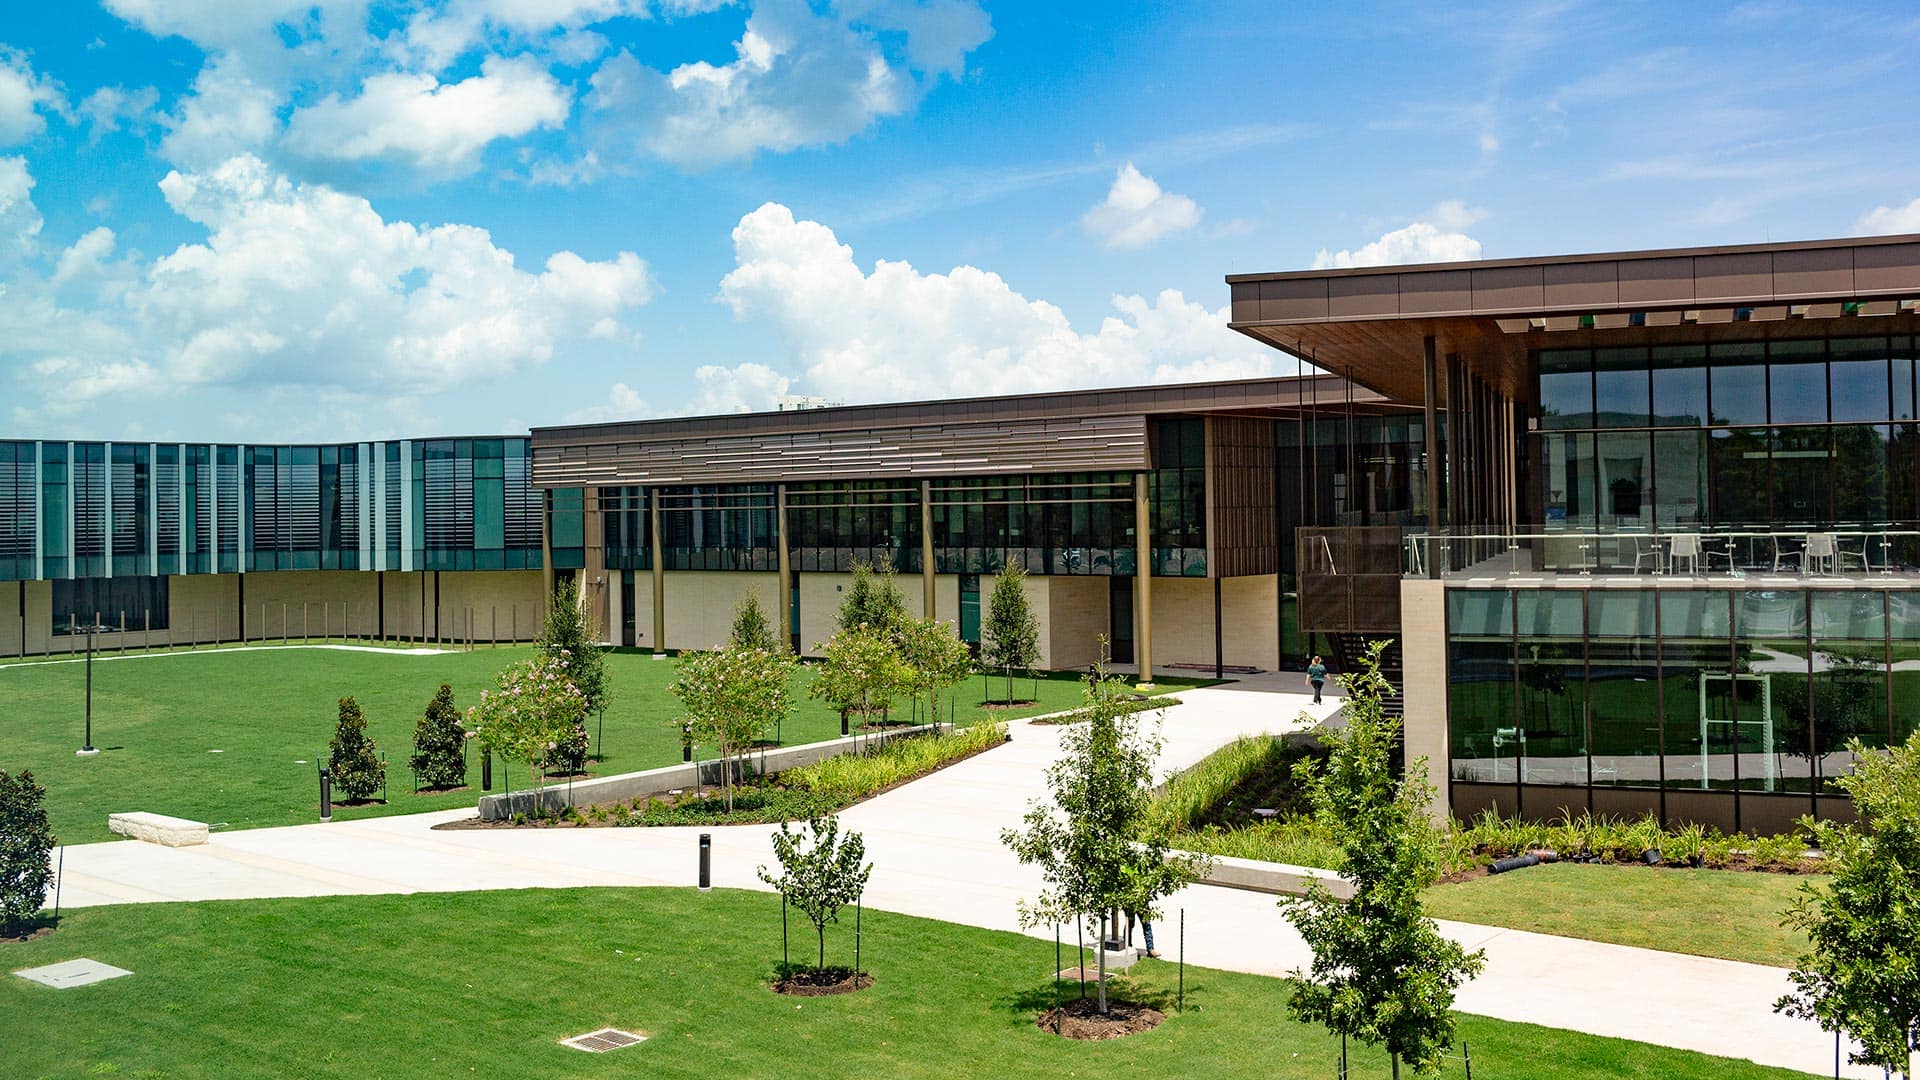 The UHCL Recreation and Wellness Center with green lawns